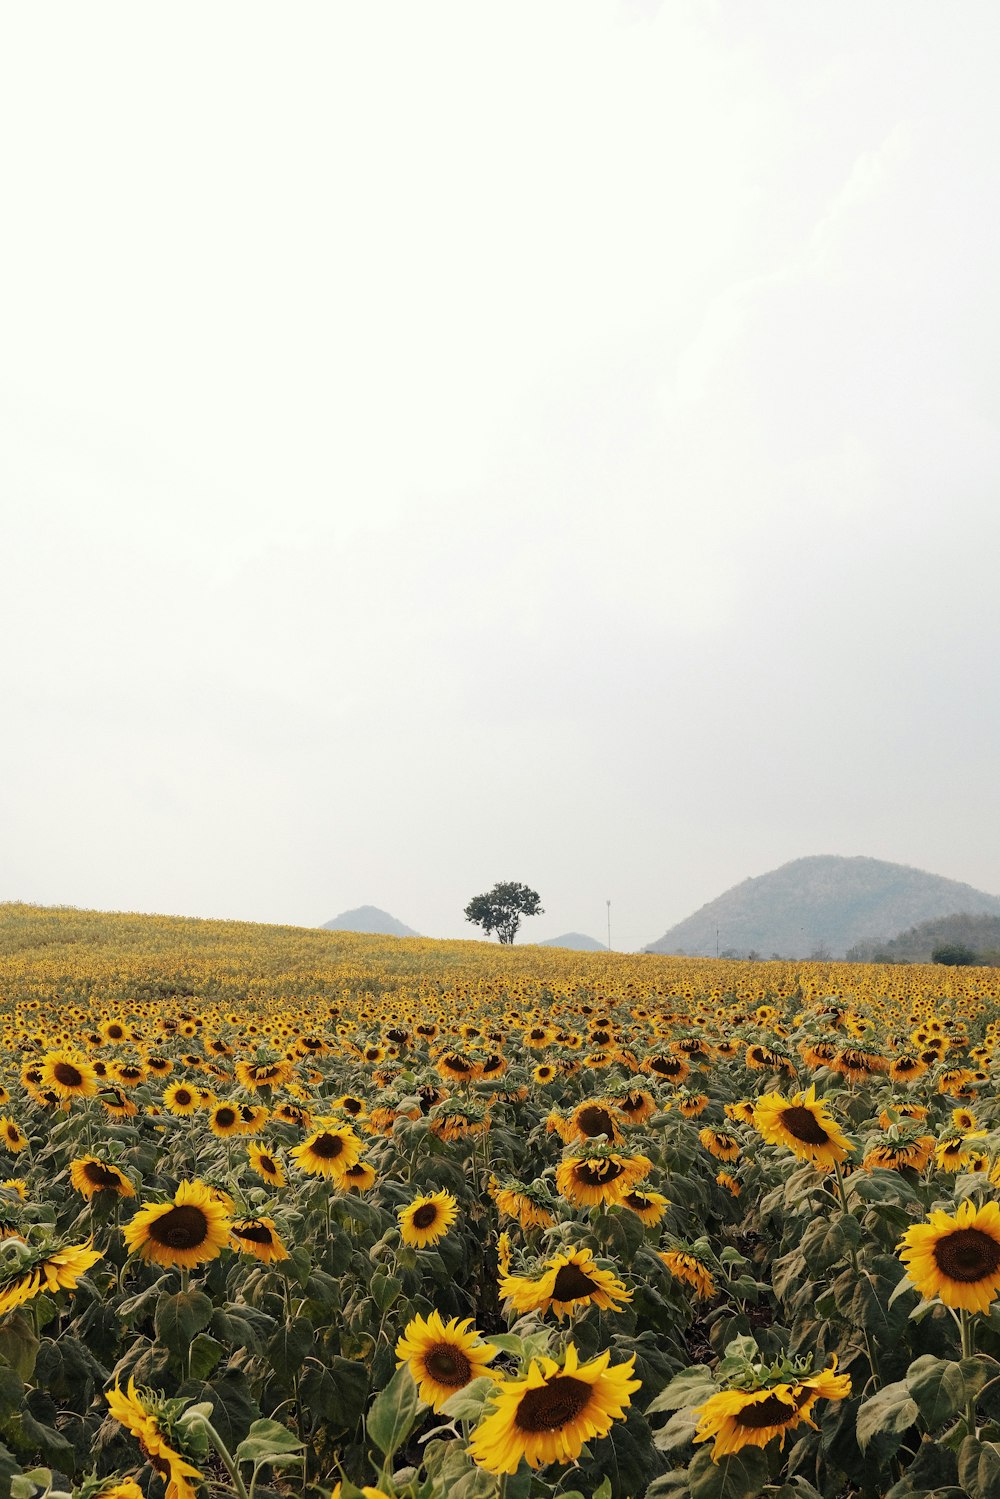 a field of sunflowers with a lone tree in the distance